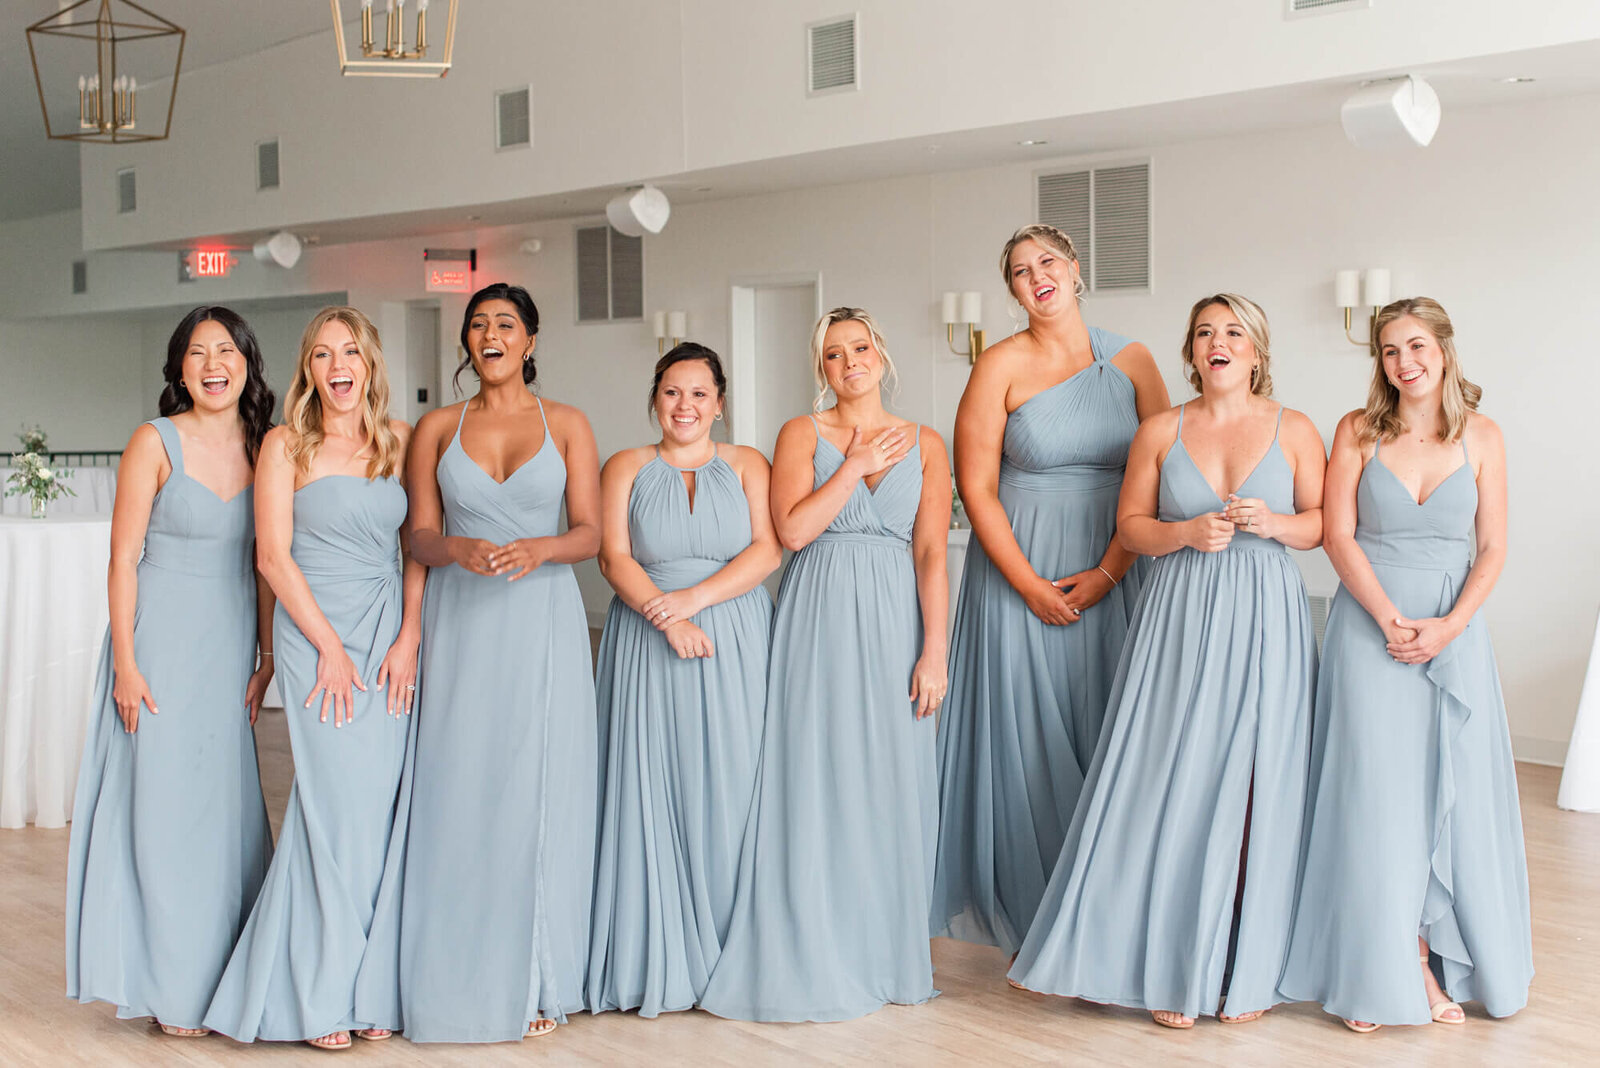 Bridesmaids looking happy, seeing the bride for the first time, at The Eloise wedding venue near Madison, WI